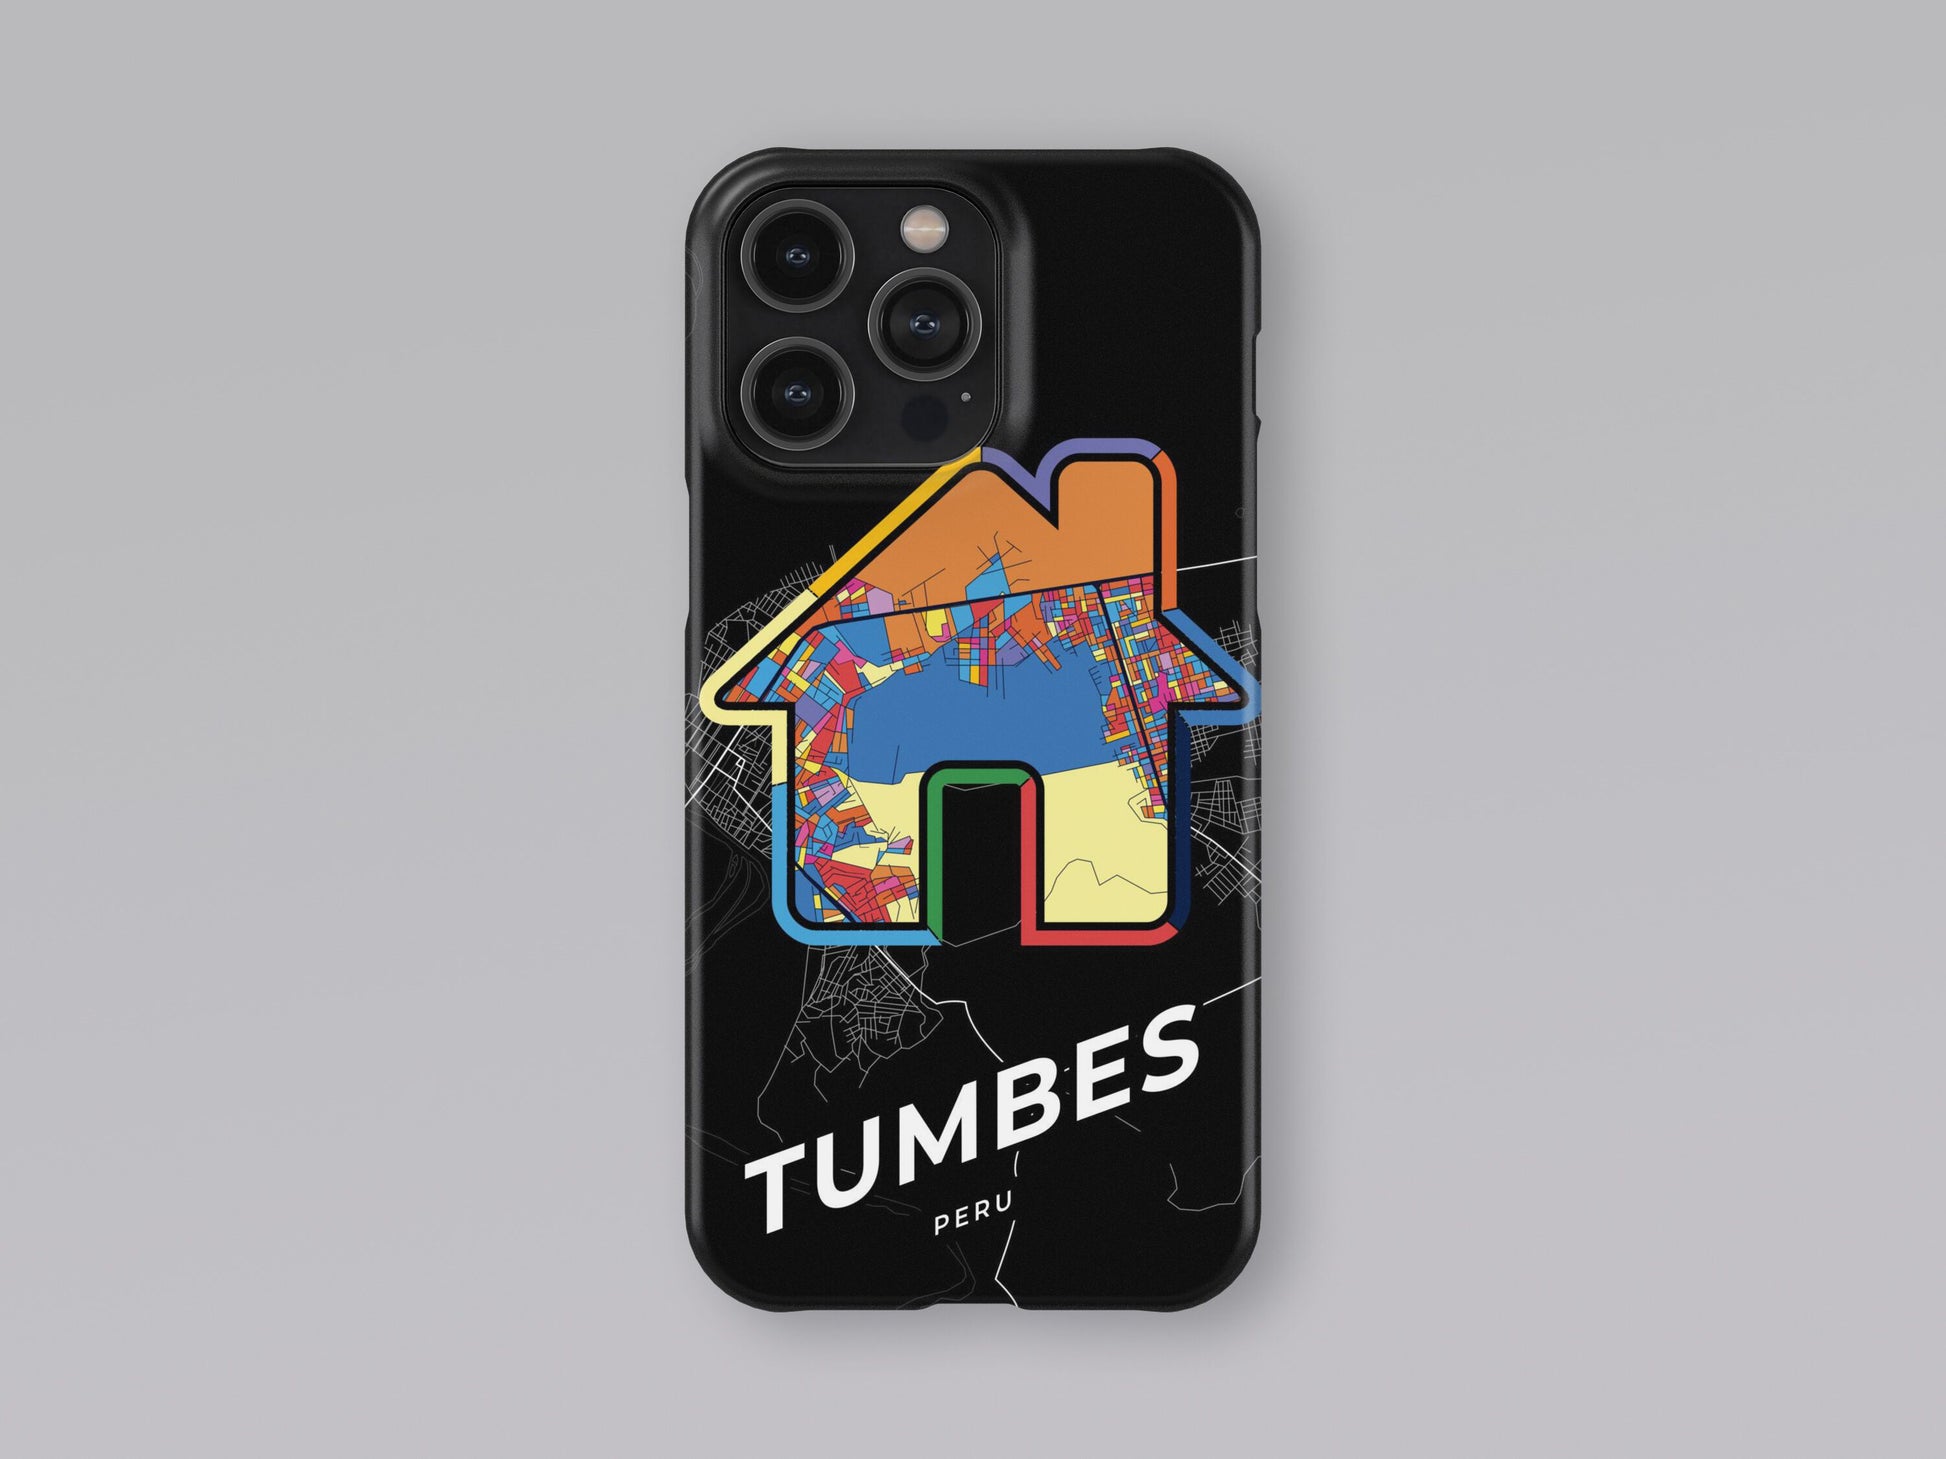 Tumbes Peru slim phone case with colorful icon. Birthday, wedding or housewarming gift. Couple match cases. 3